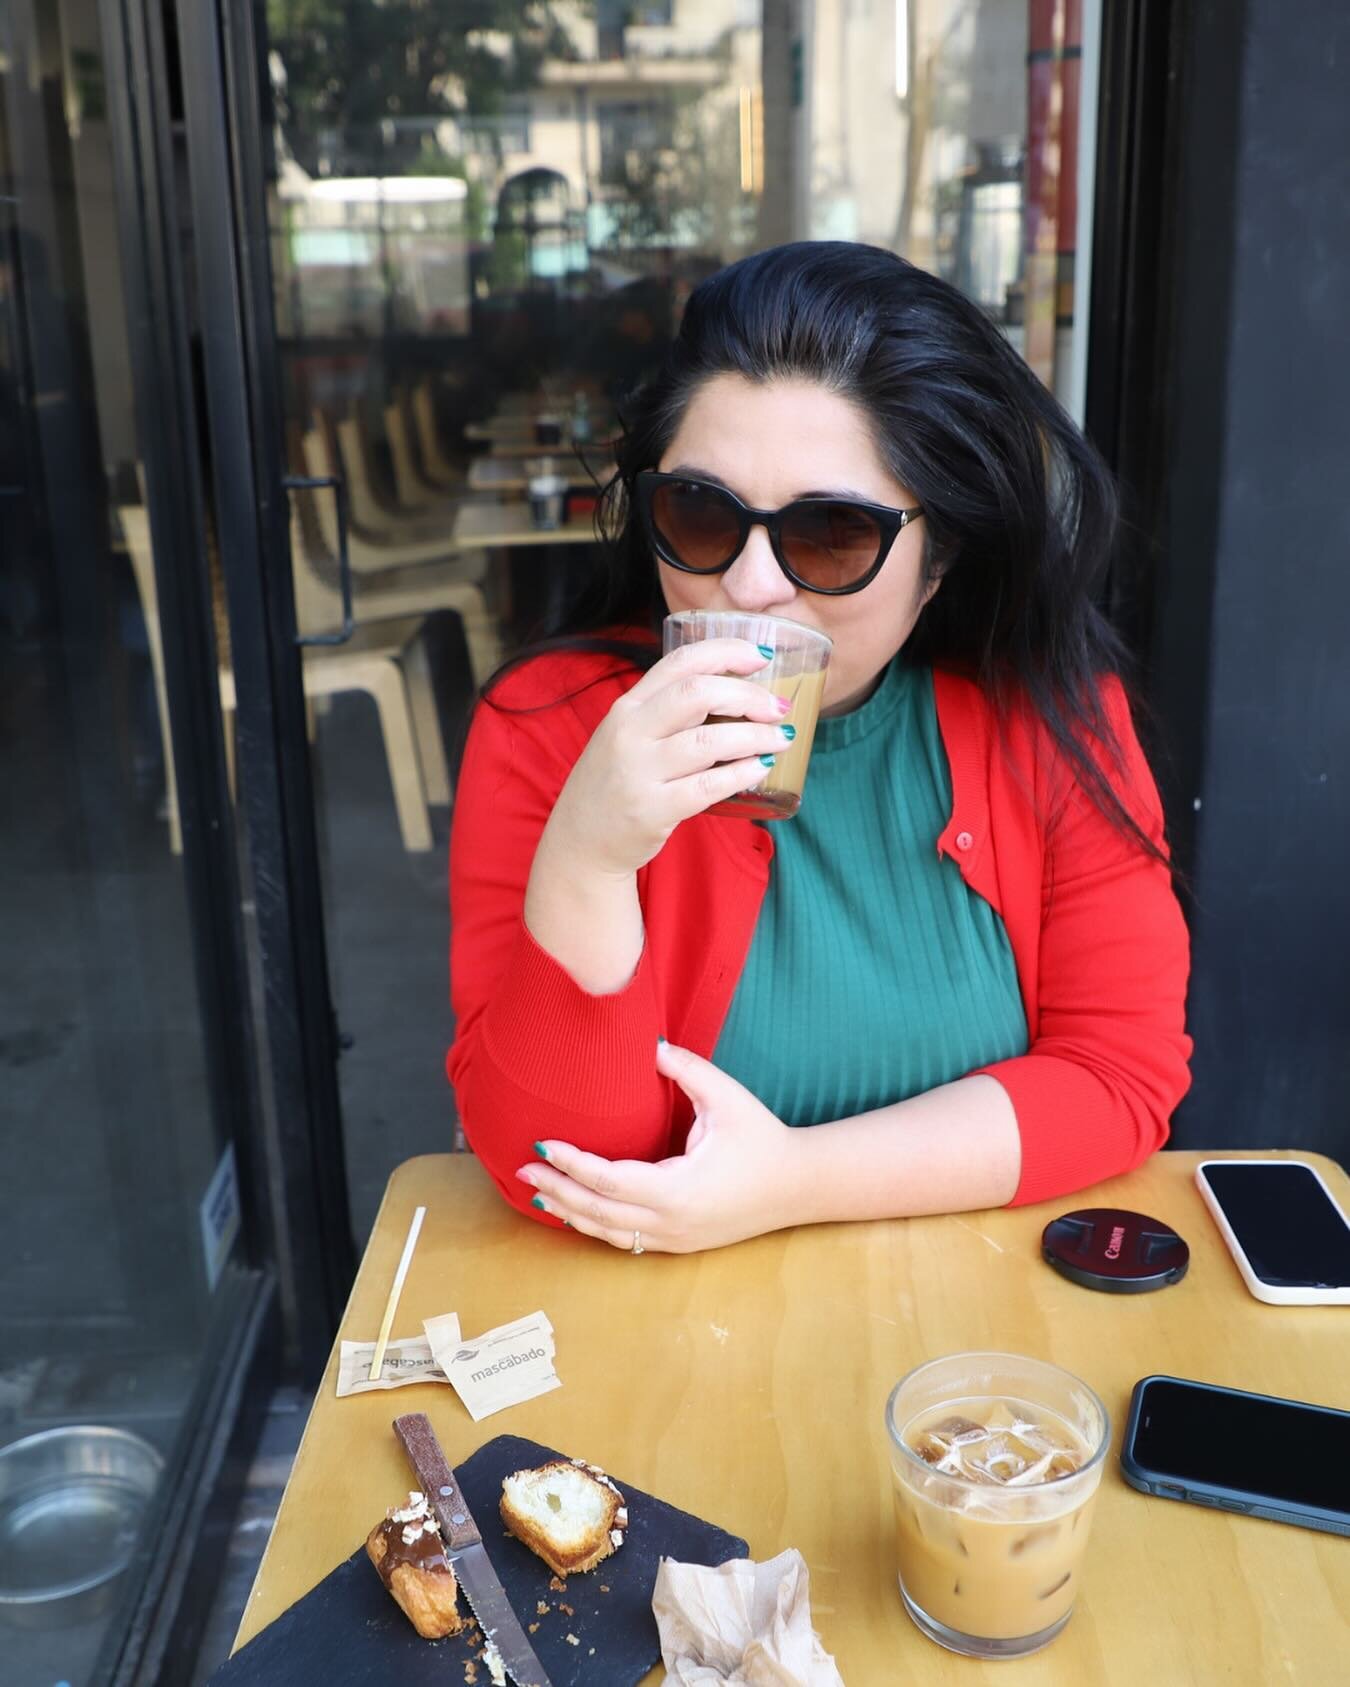 Unruly hair and a latte in hand &ndash; the ultimate city exploration combo! 🌆☕ Can hardly wait for a reunion with Mexico City. 🇲🇽 Until then, savoring the memories and the caffeine buzz! 💖 

#CityAdventures 
#LatteLove
#MexicoCityMagic
#travelvl